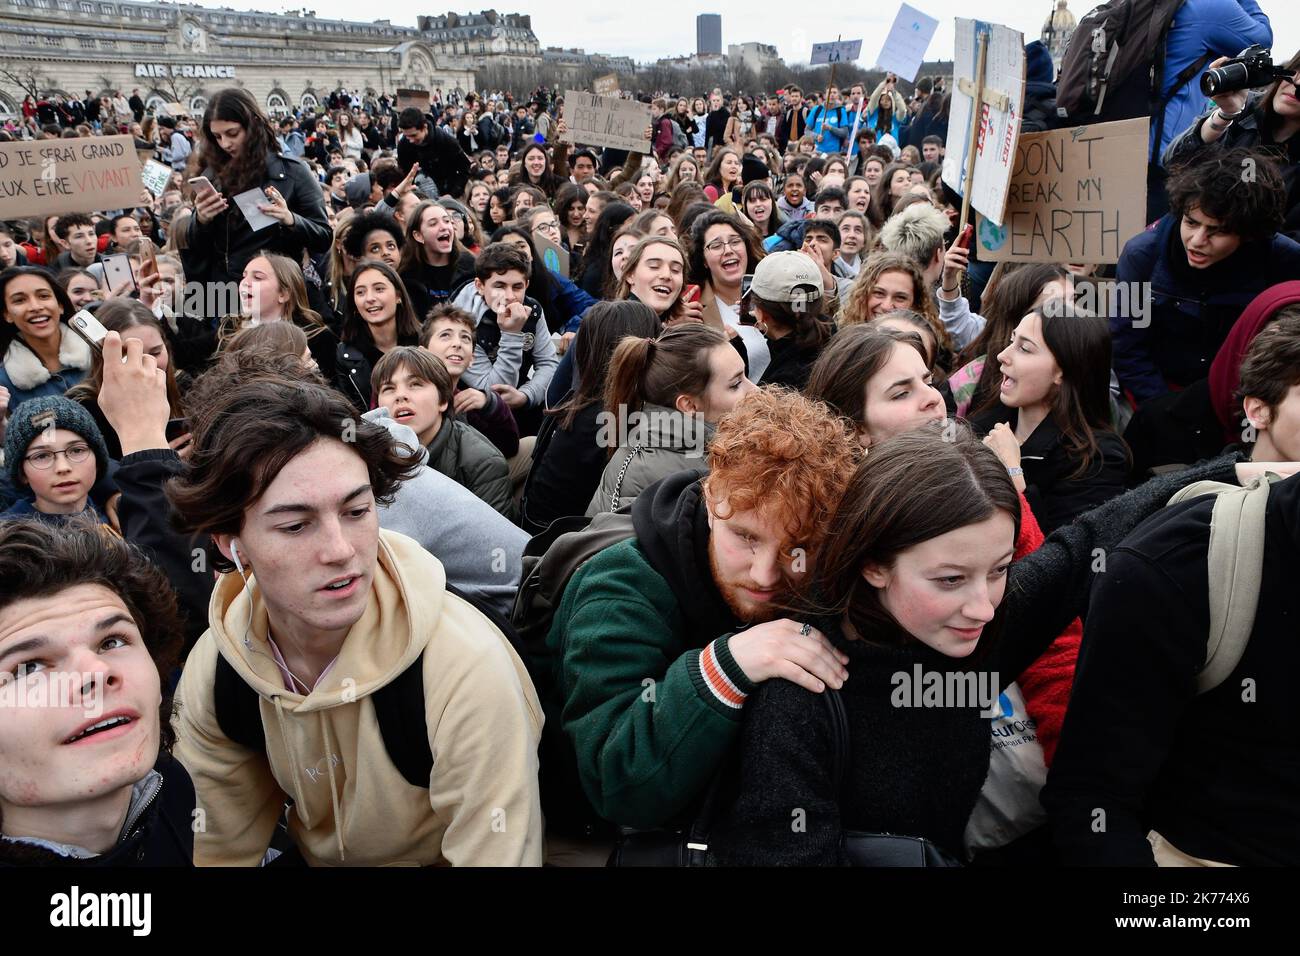 Youth protest and call for a climate strike at the initiative of Swedish activist Greta Thunberg, a 16-year-old figurehead for climate change, to warn climate change policy. Stock Photo